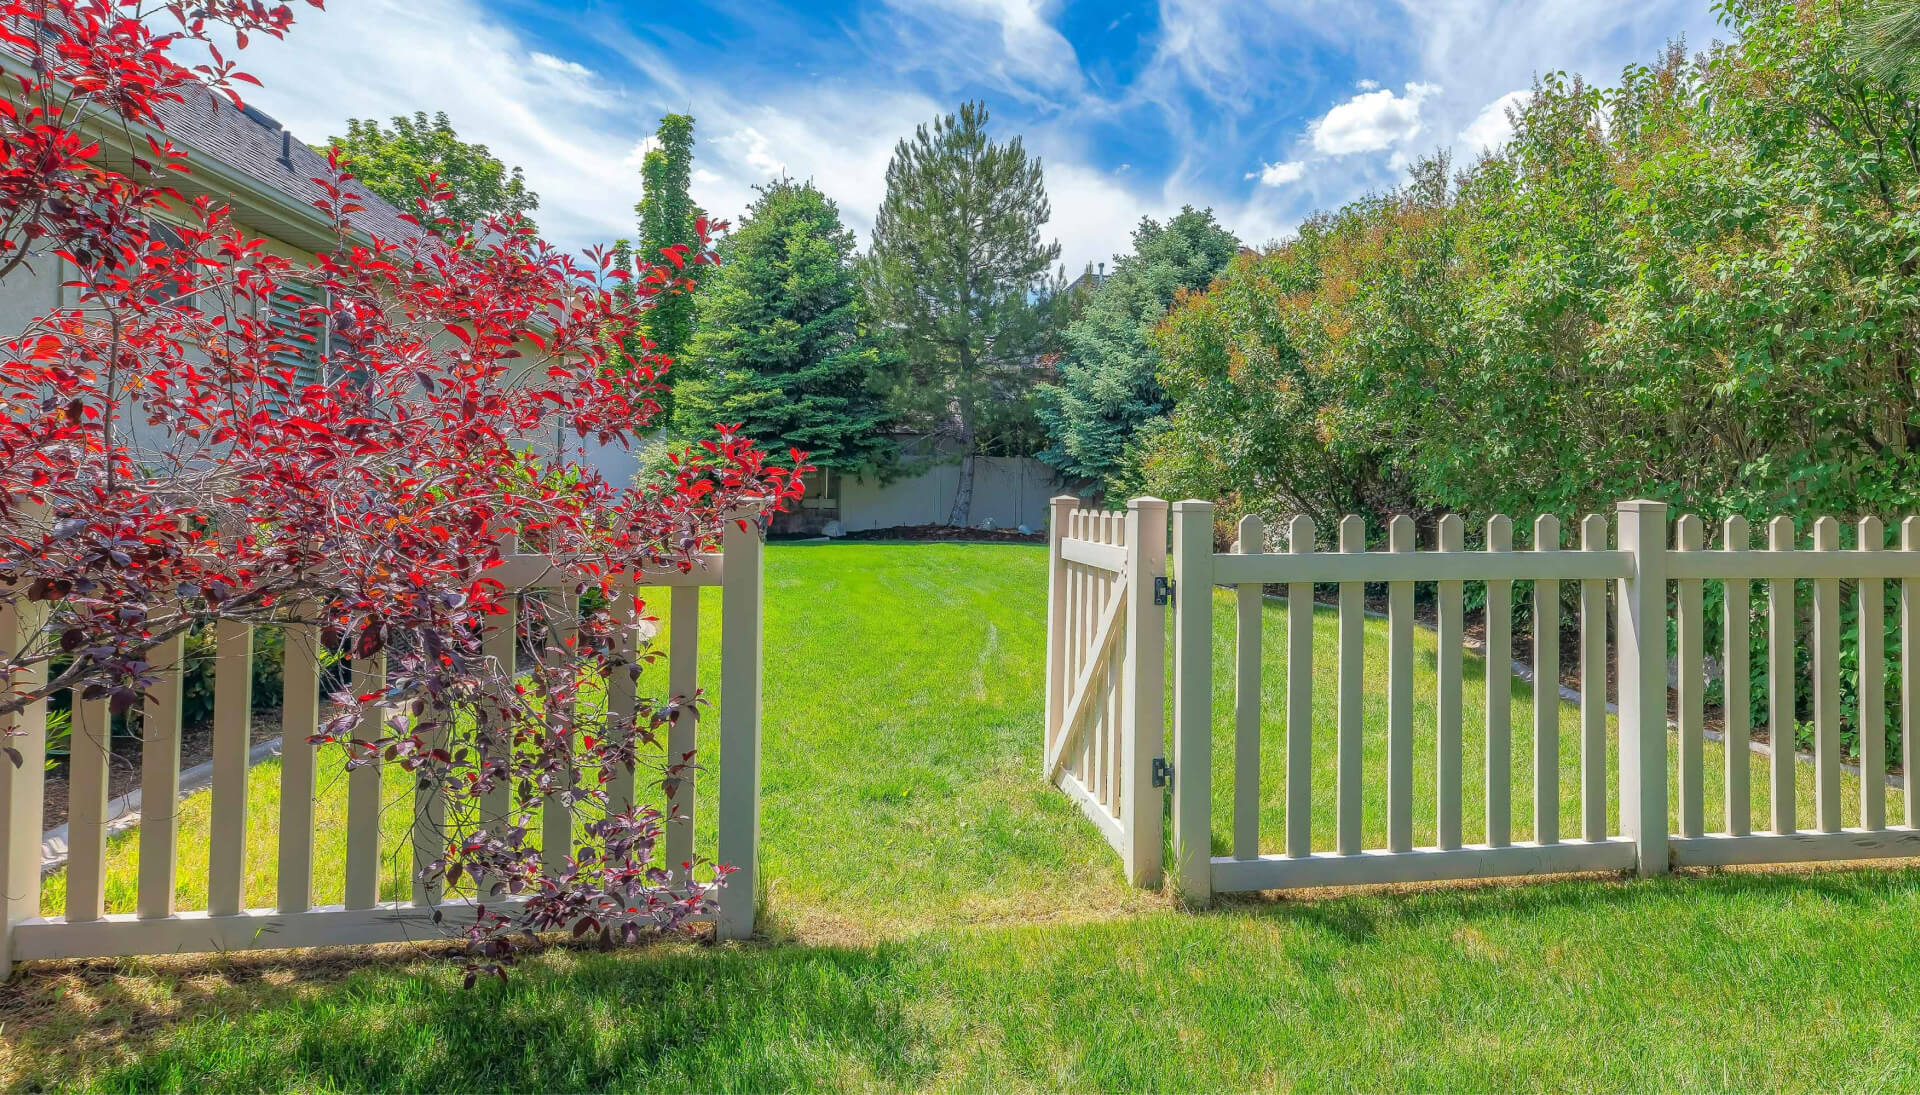 A functional fence gate providing access to a well-maintained backyard, surrounded by a wooden fence in Albany